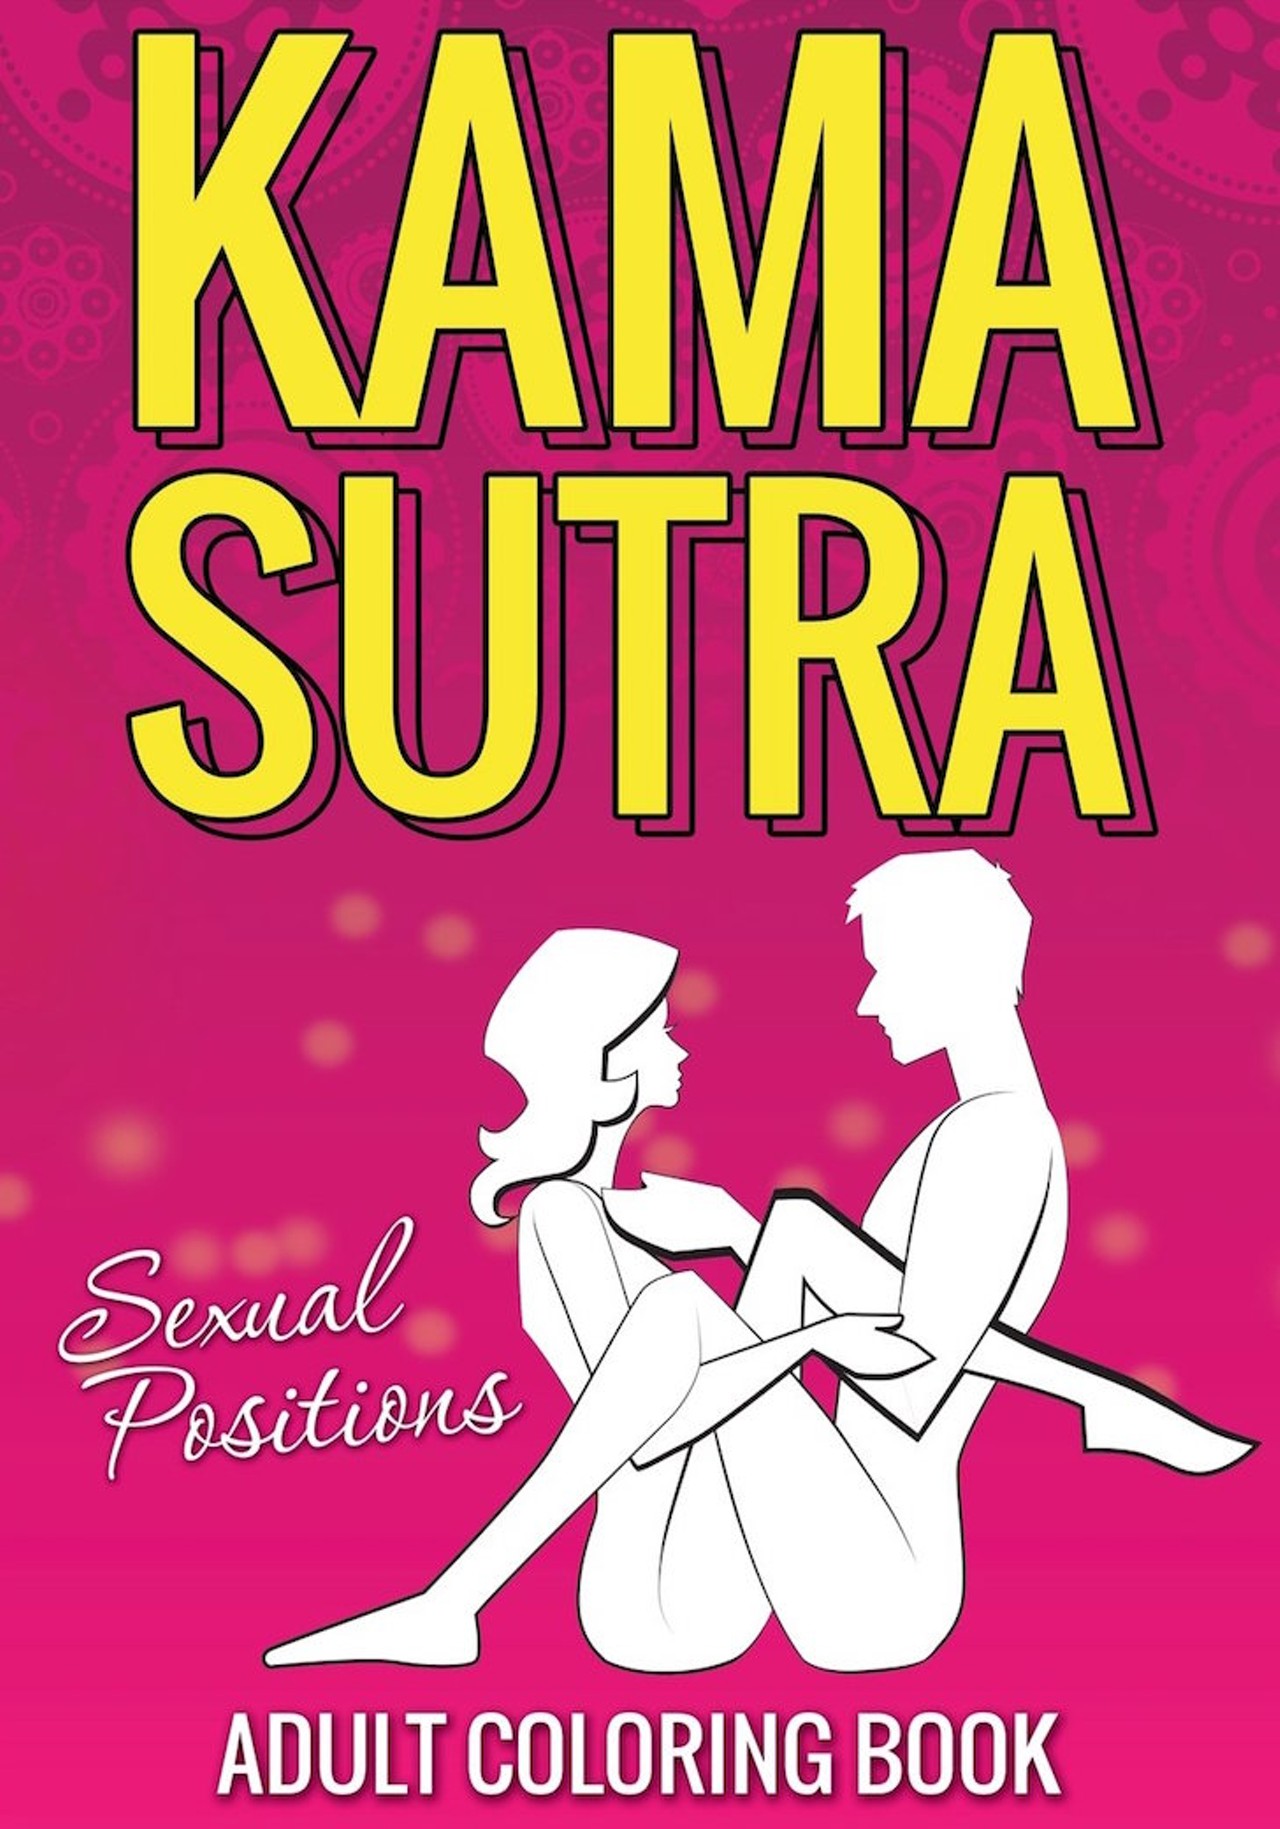  Kama Sutra Sexual Positions: Adult Coloring Book
What will they think of next &#133; ?
Buy it at amazon.com 